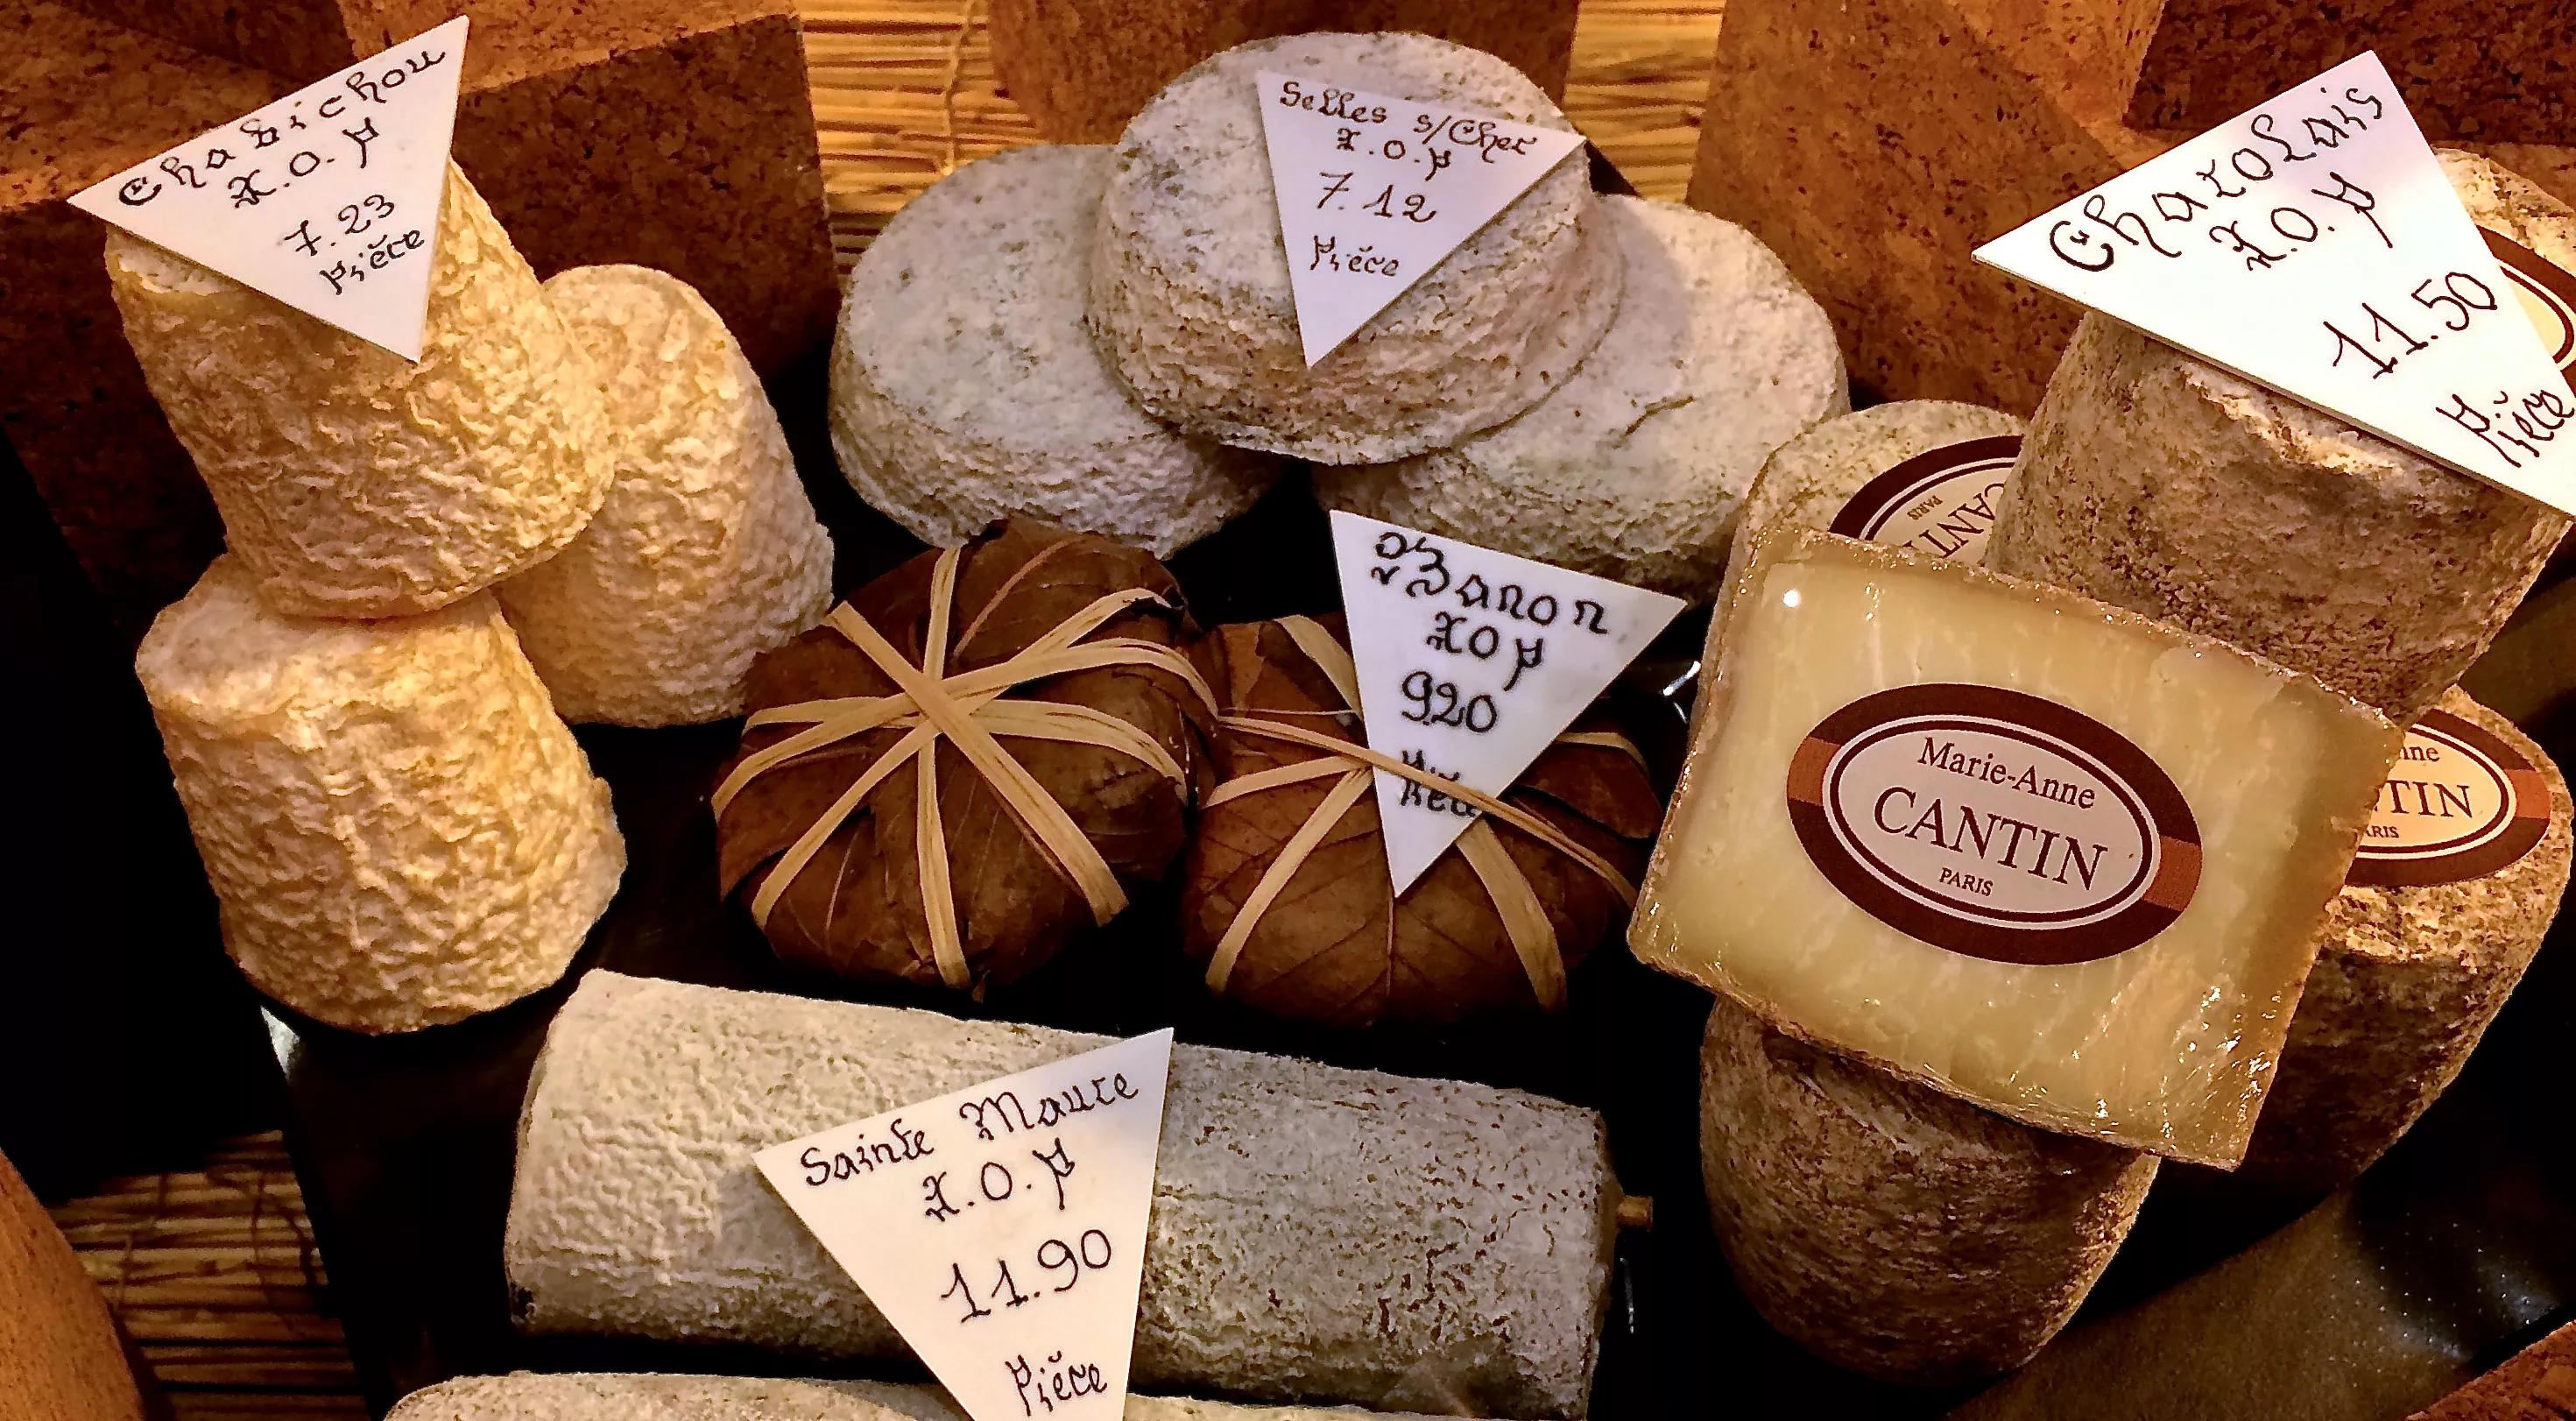 Marie-Anne Cantin in France, Europe | Cheesemakers - Rated 1